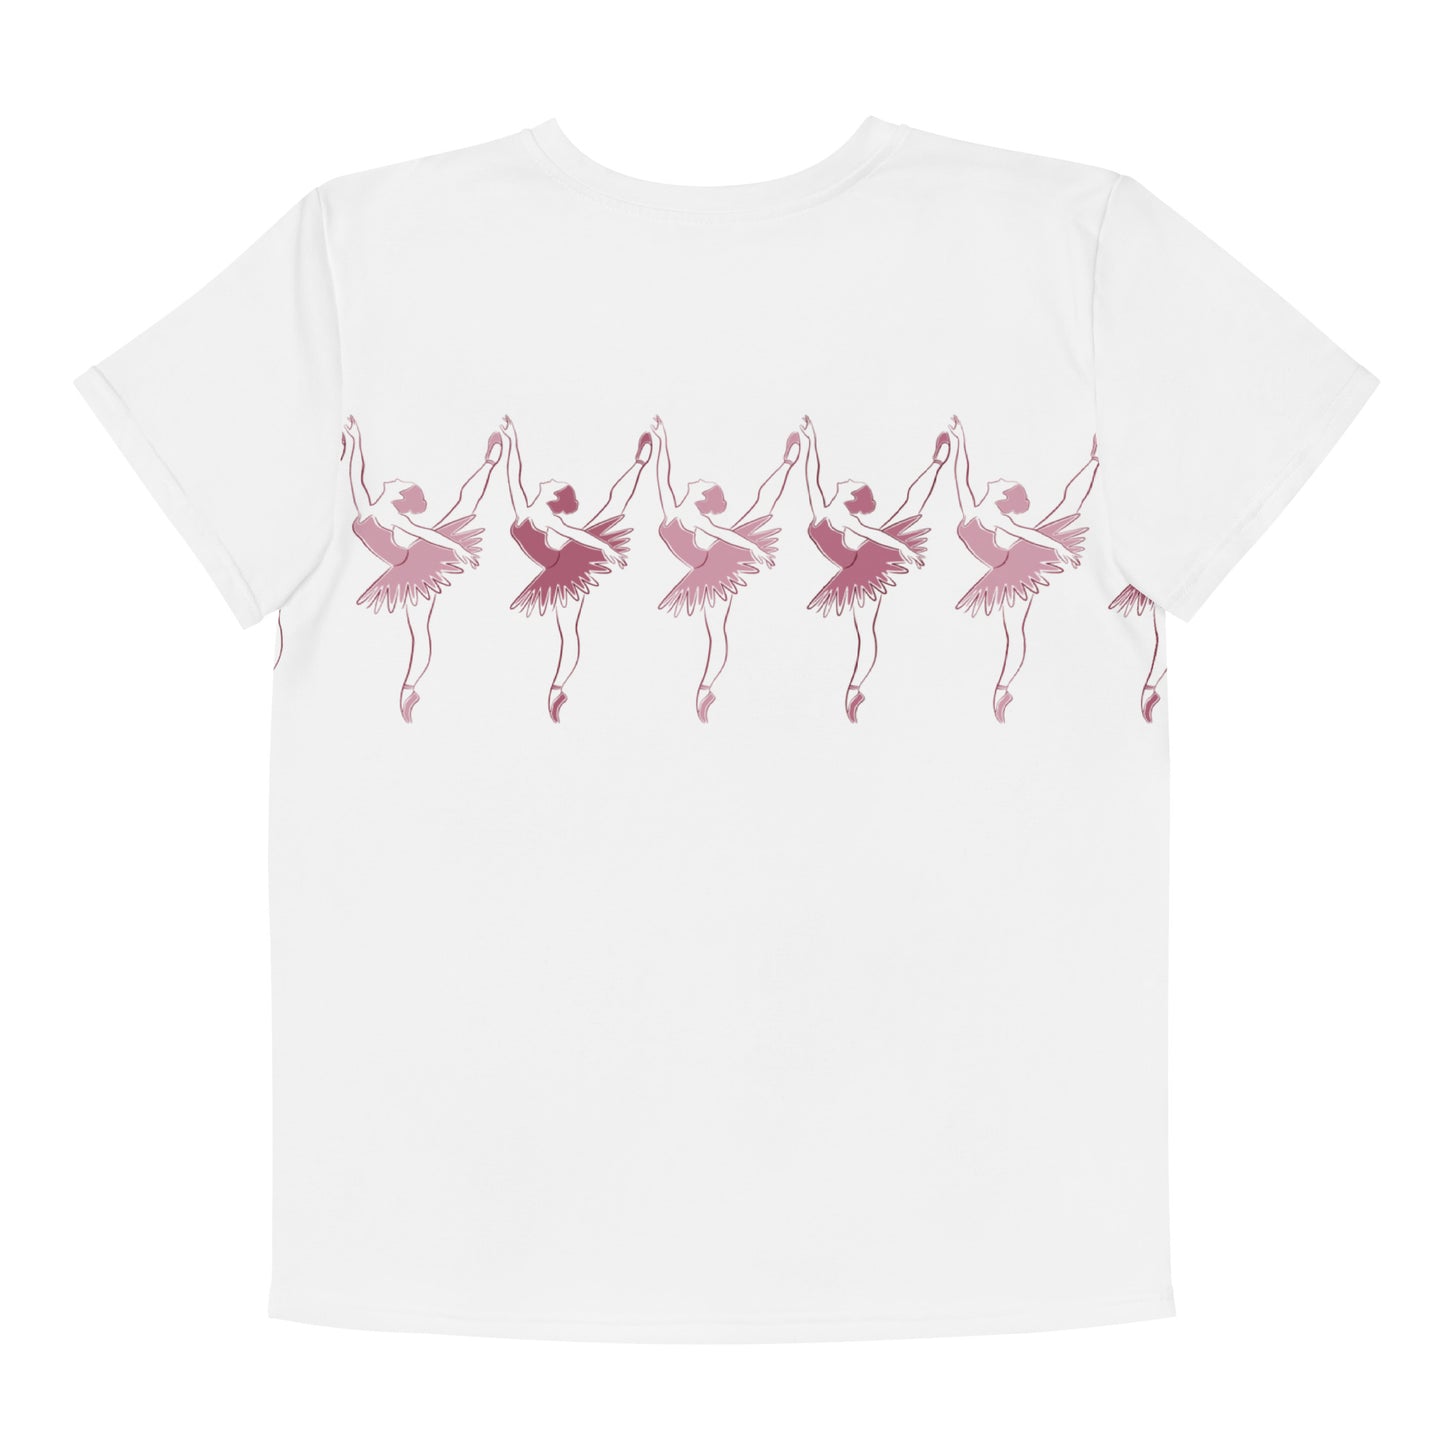 I'll Be At Dance Ballet Youth crew neck t-shirt